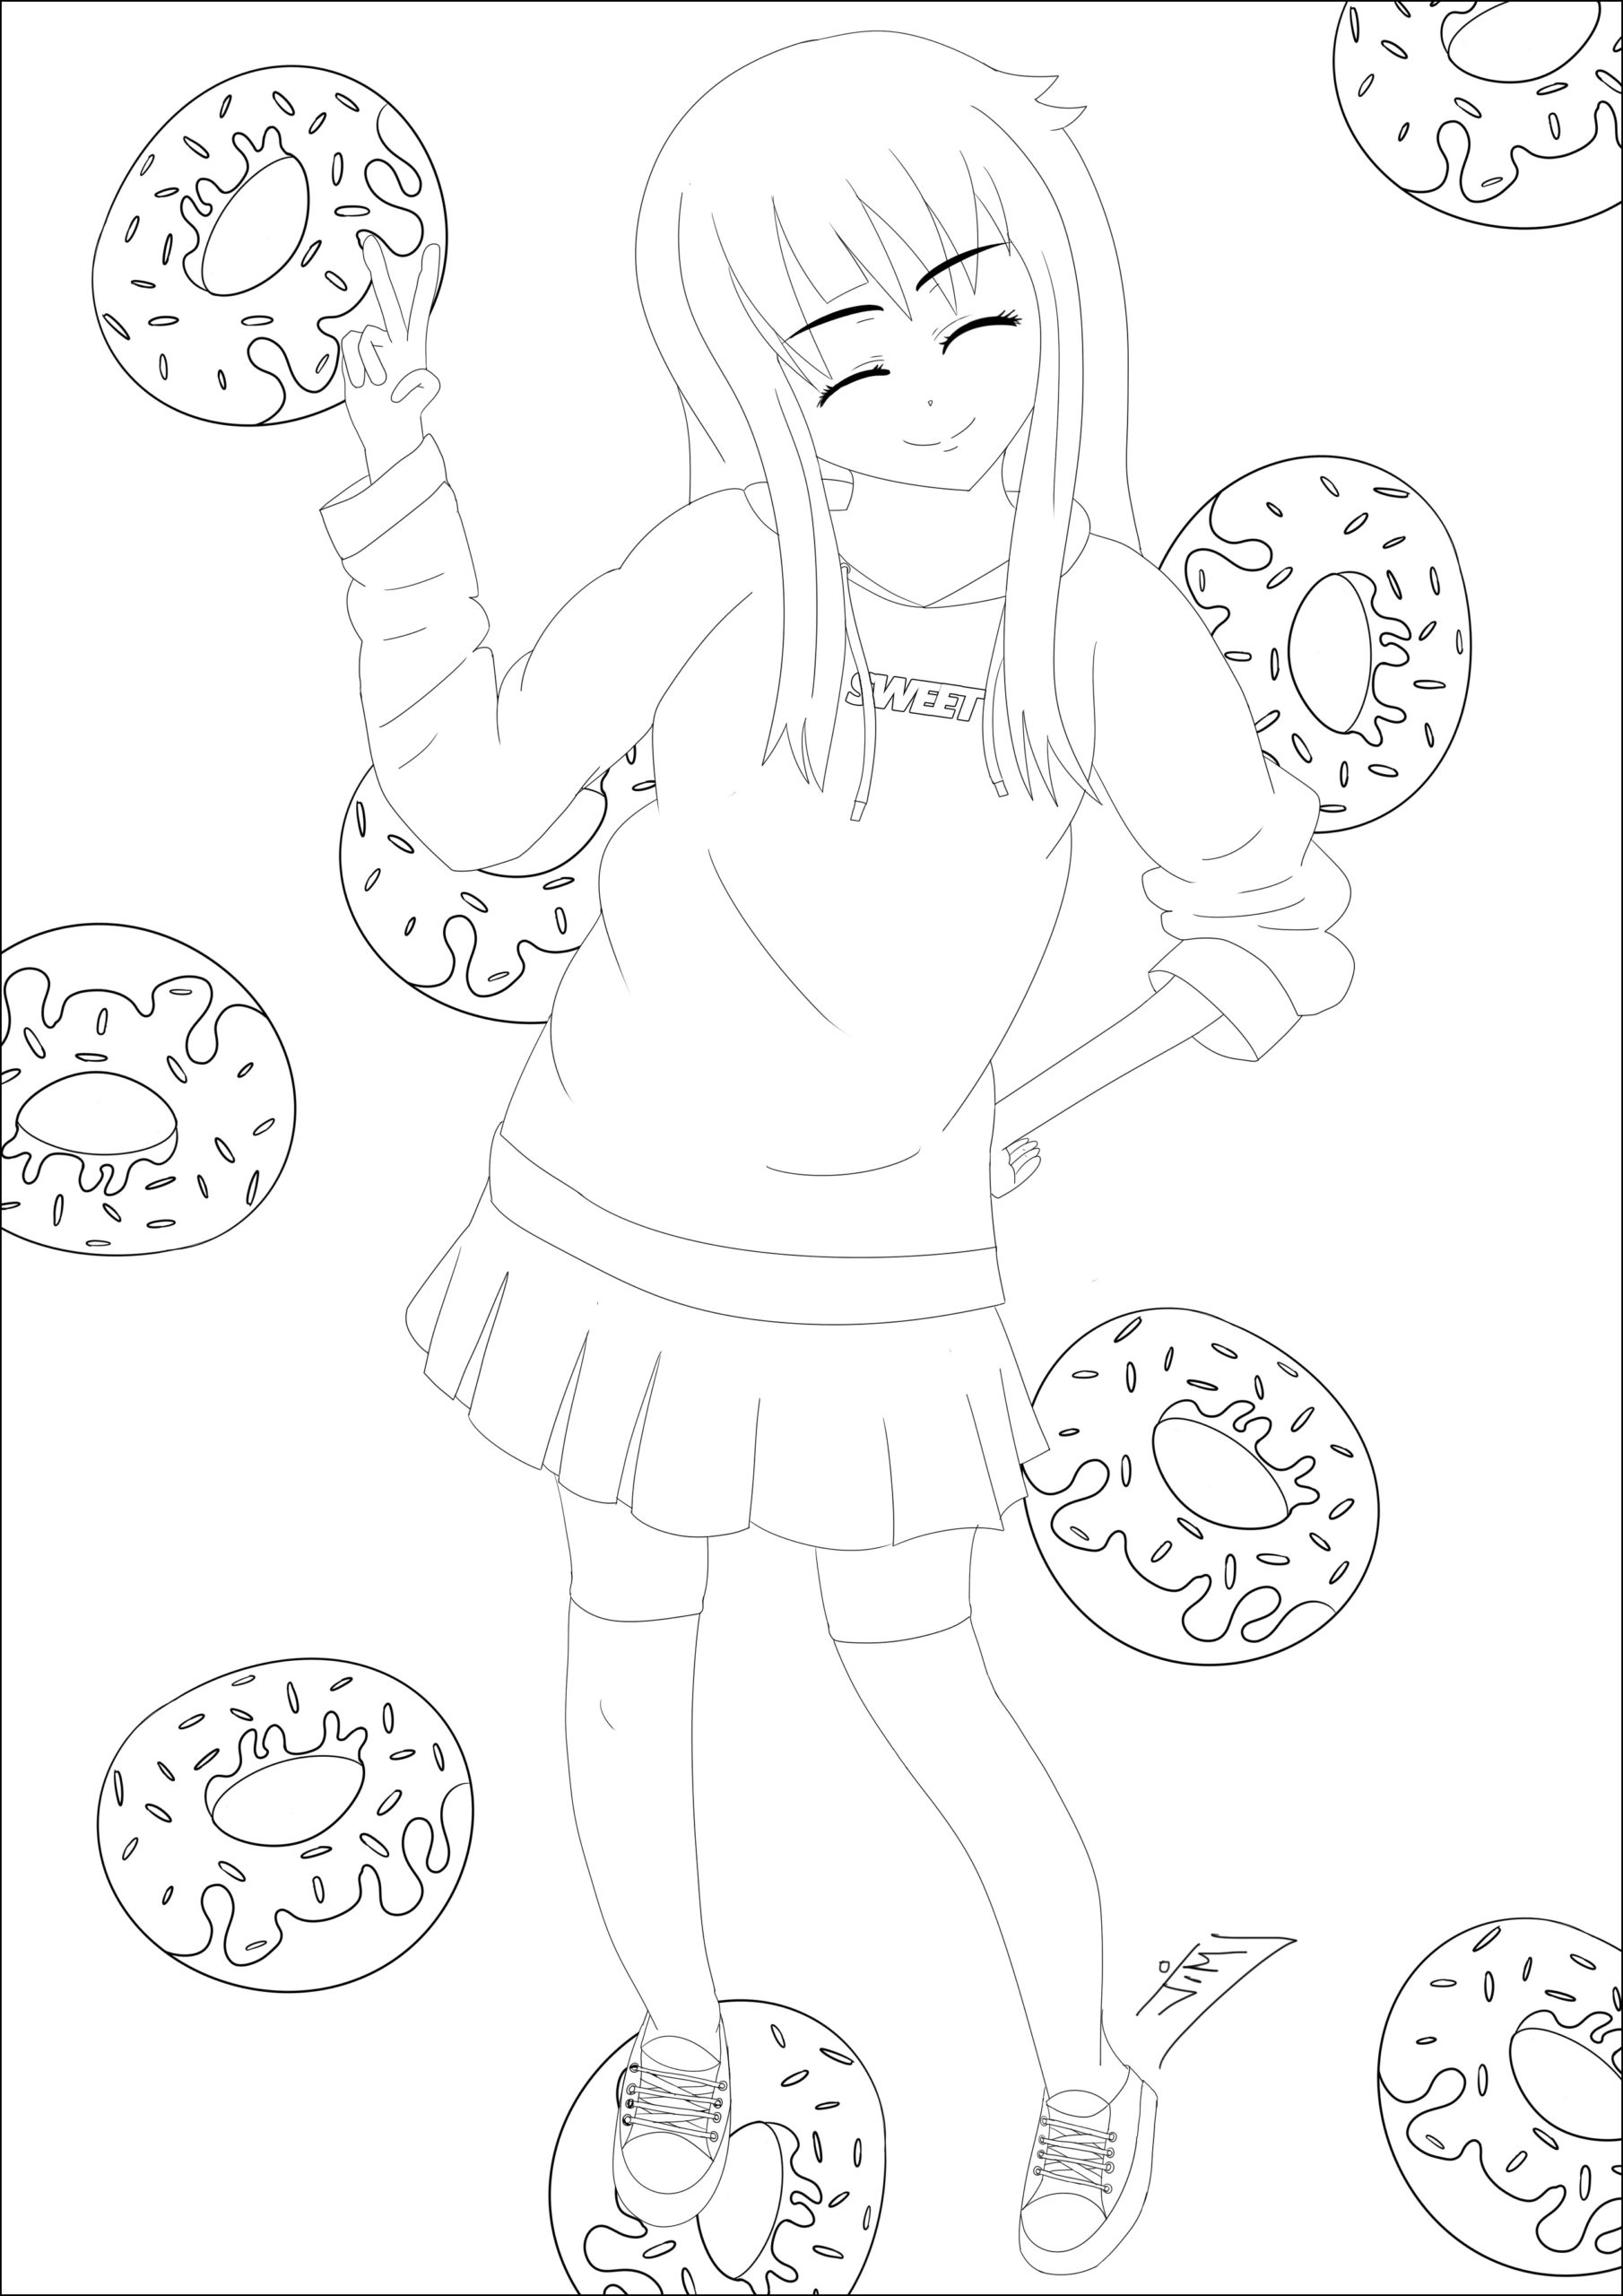 Donut 25 For Kids Coloring Page